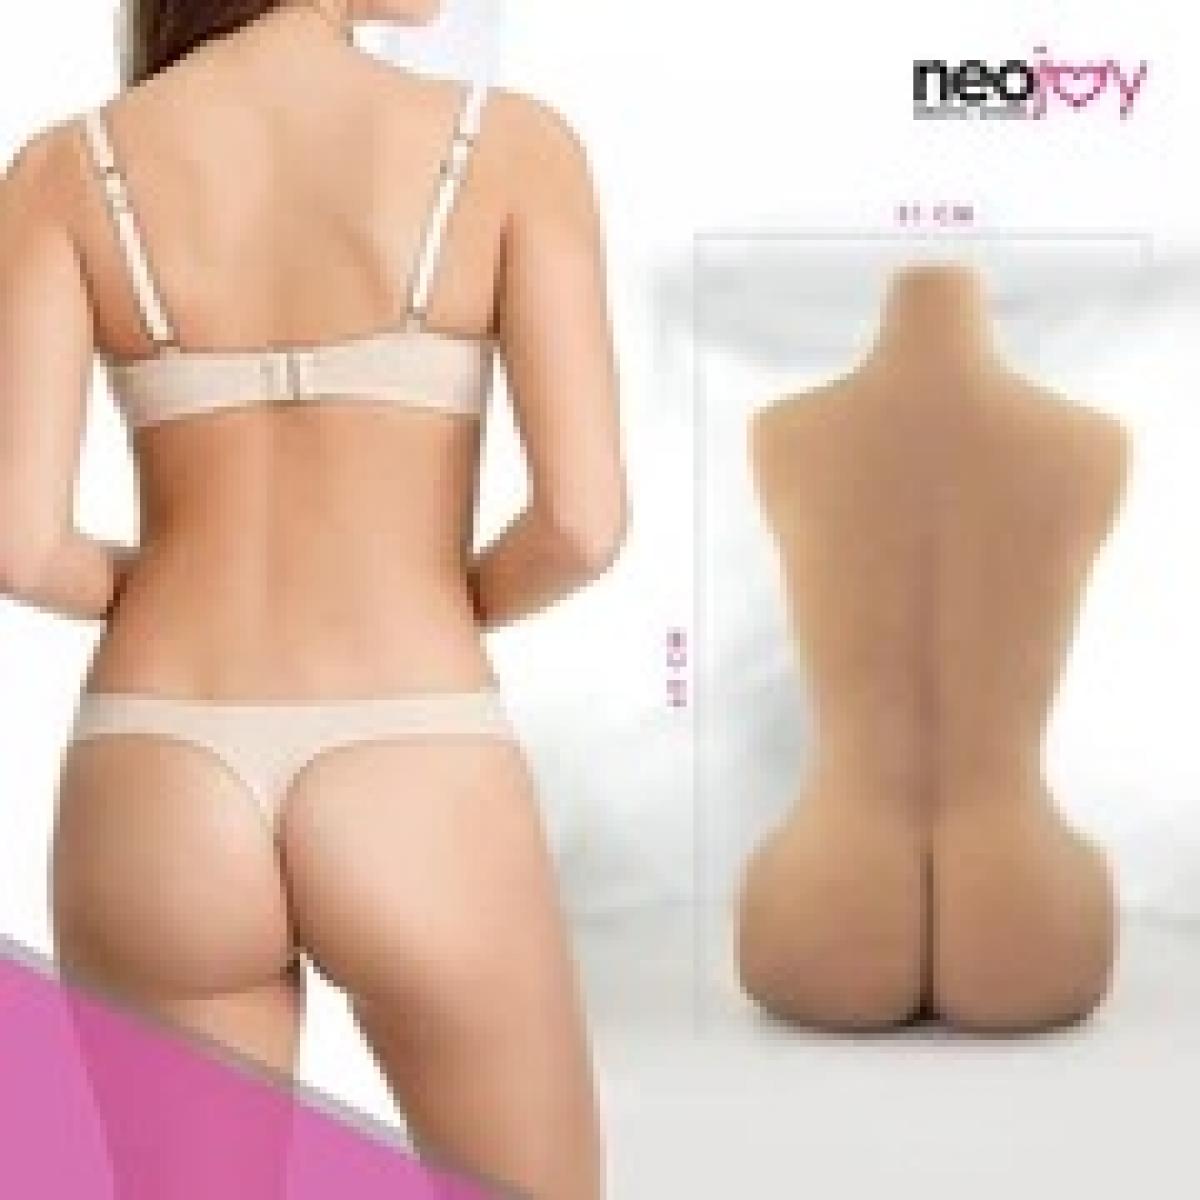 Neojoy Easy Torso With Girlfriend Maddy Head - Realistic Sex Doll Torso With Head Connector - Tan - 17kg